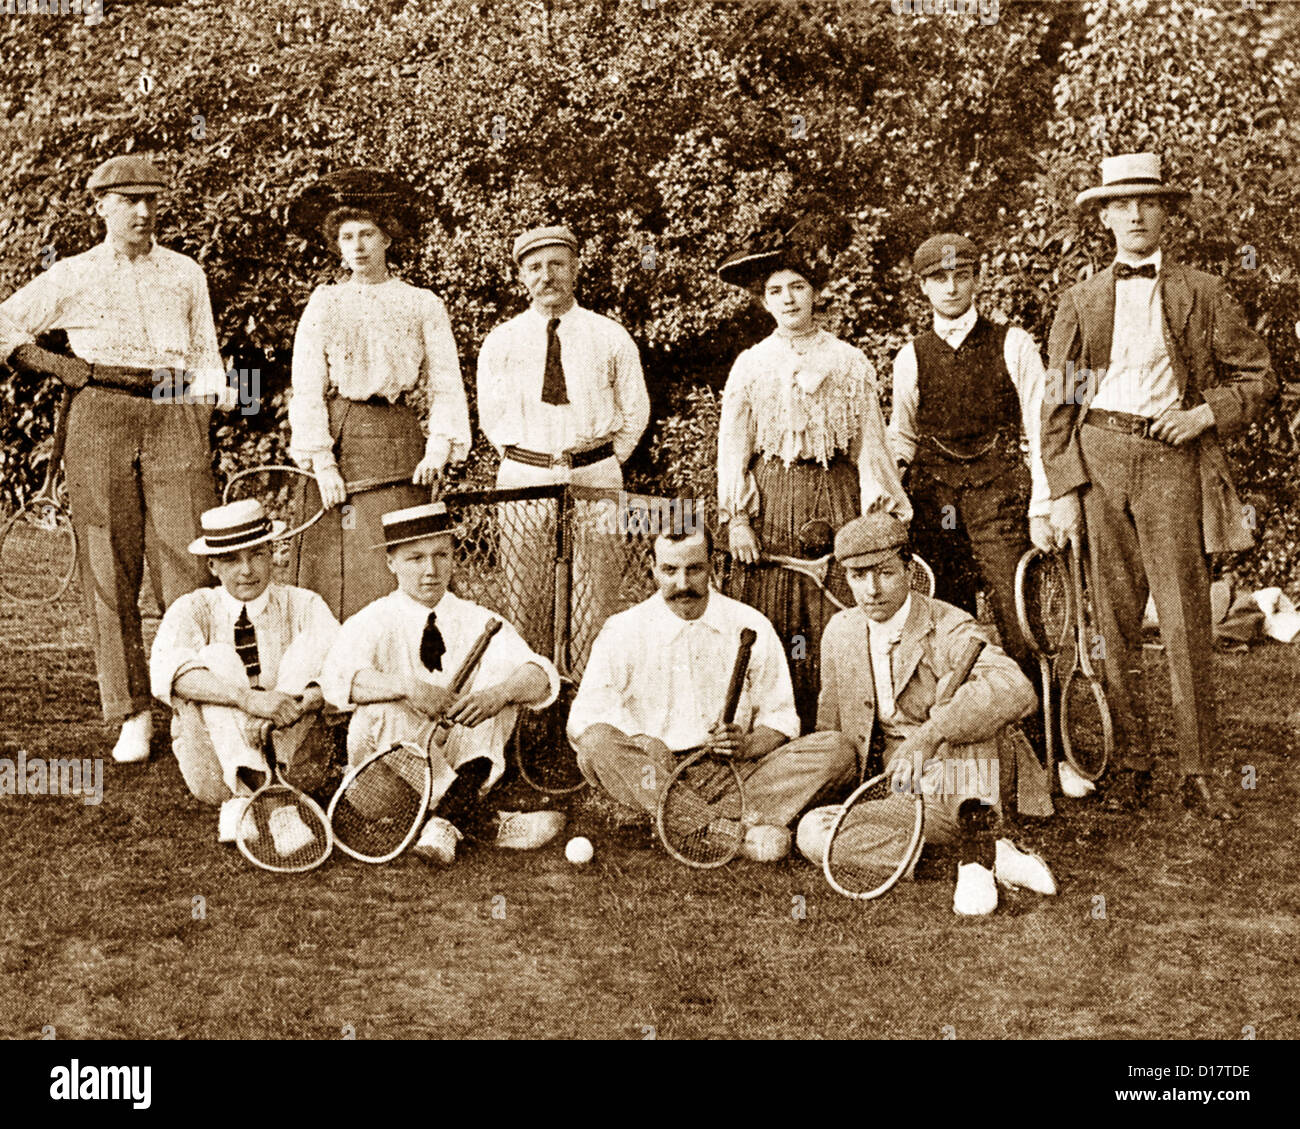 Tennis Players early 1900s Stock Photo - Alamy